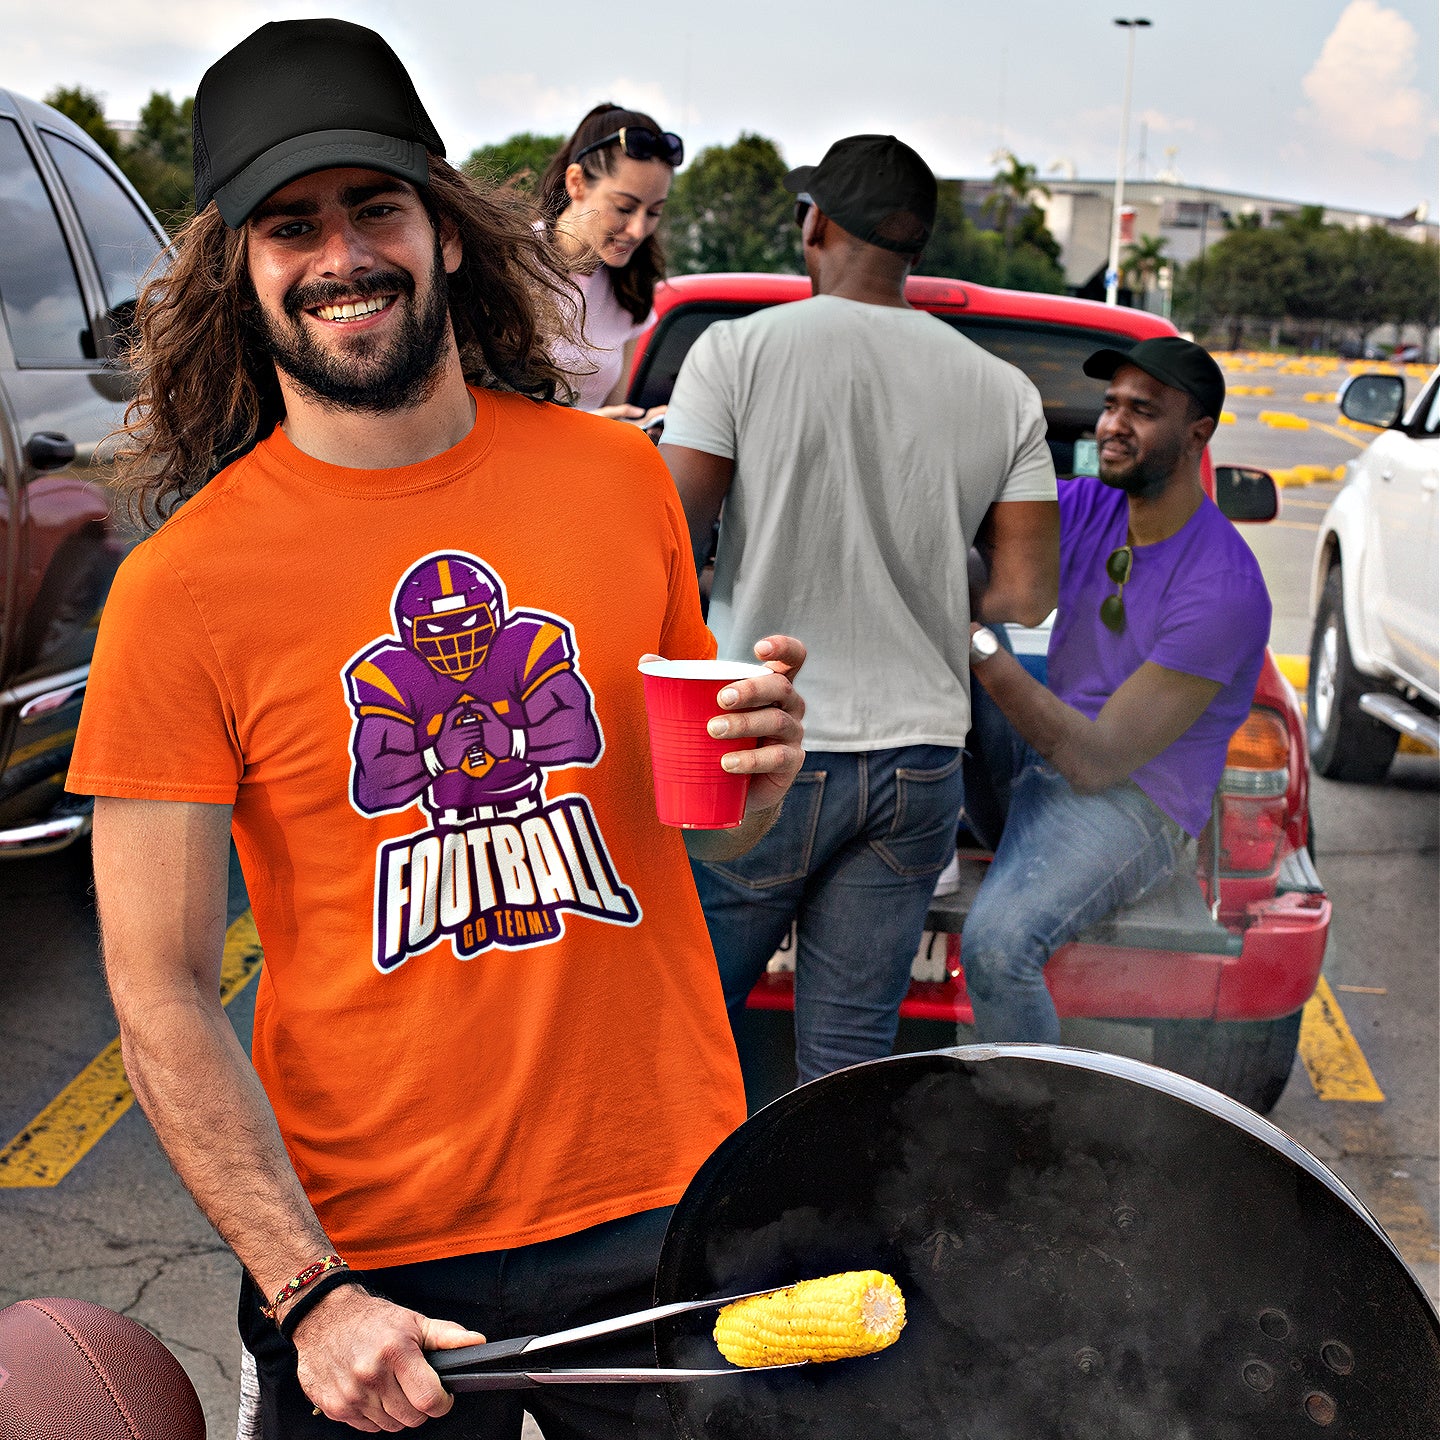 Mock up of a smiling man wearing our orange t-shirt at a tailgate party